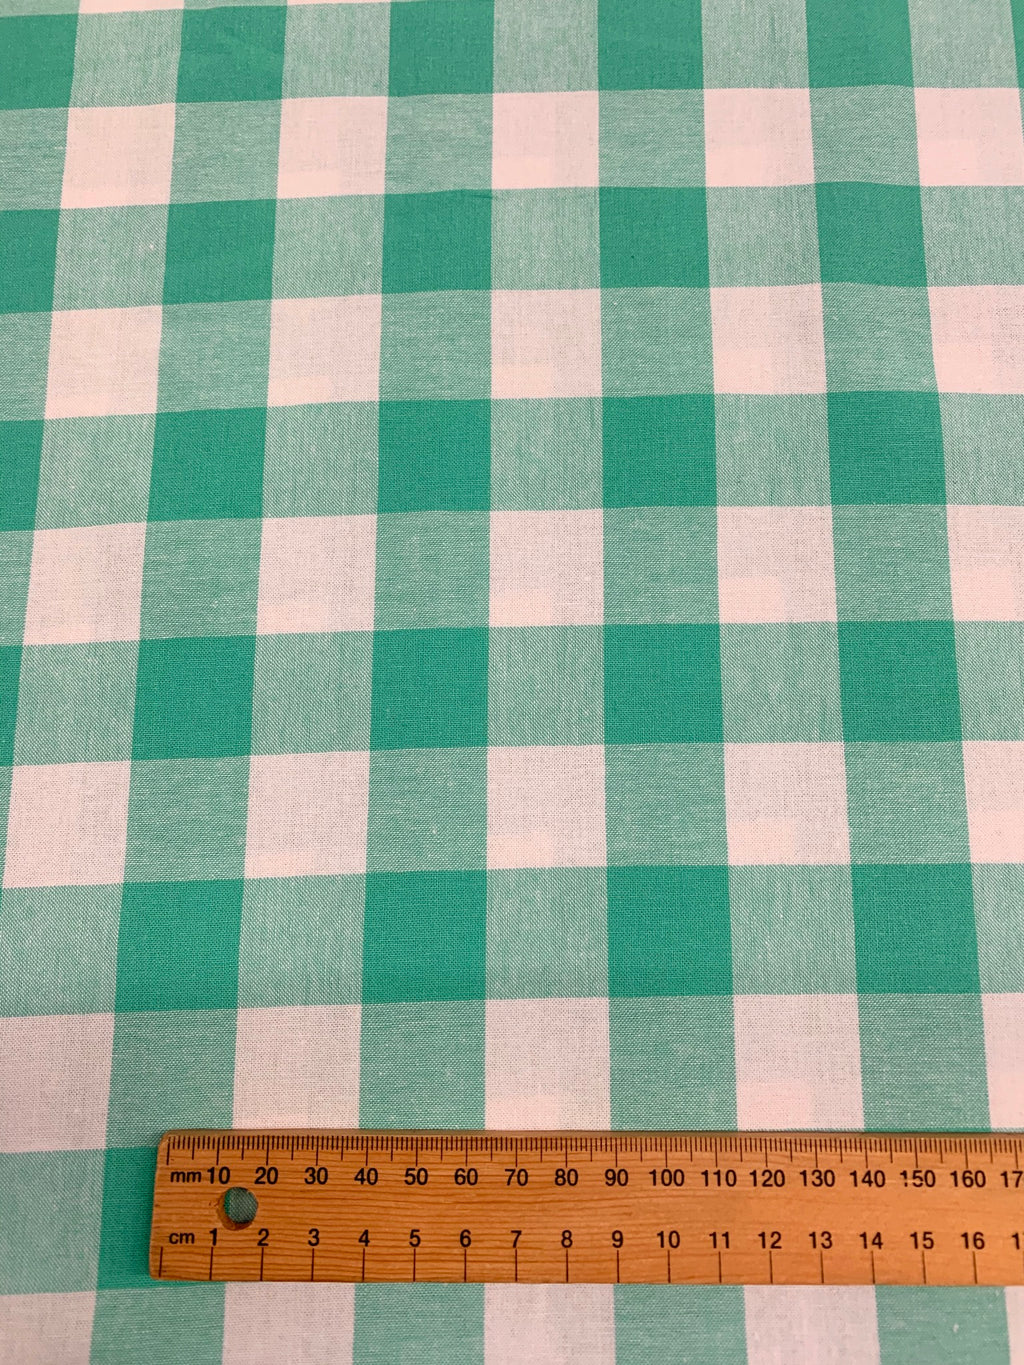 Cotton and Steel gingham check: Turquoise